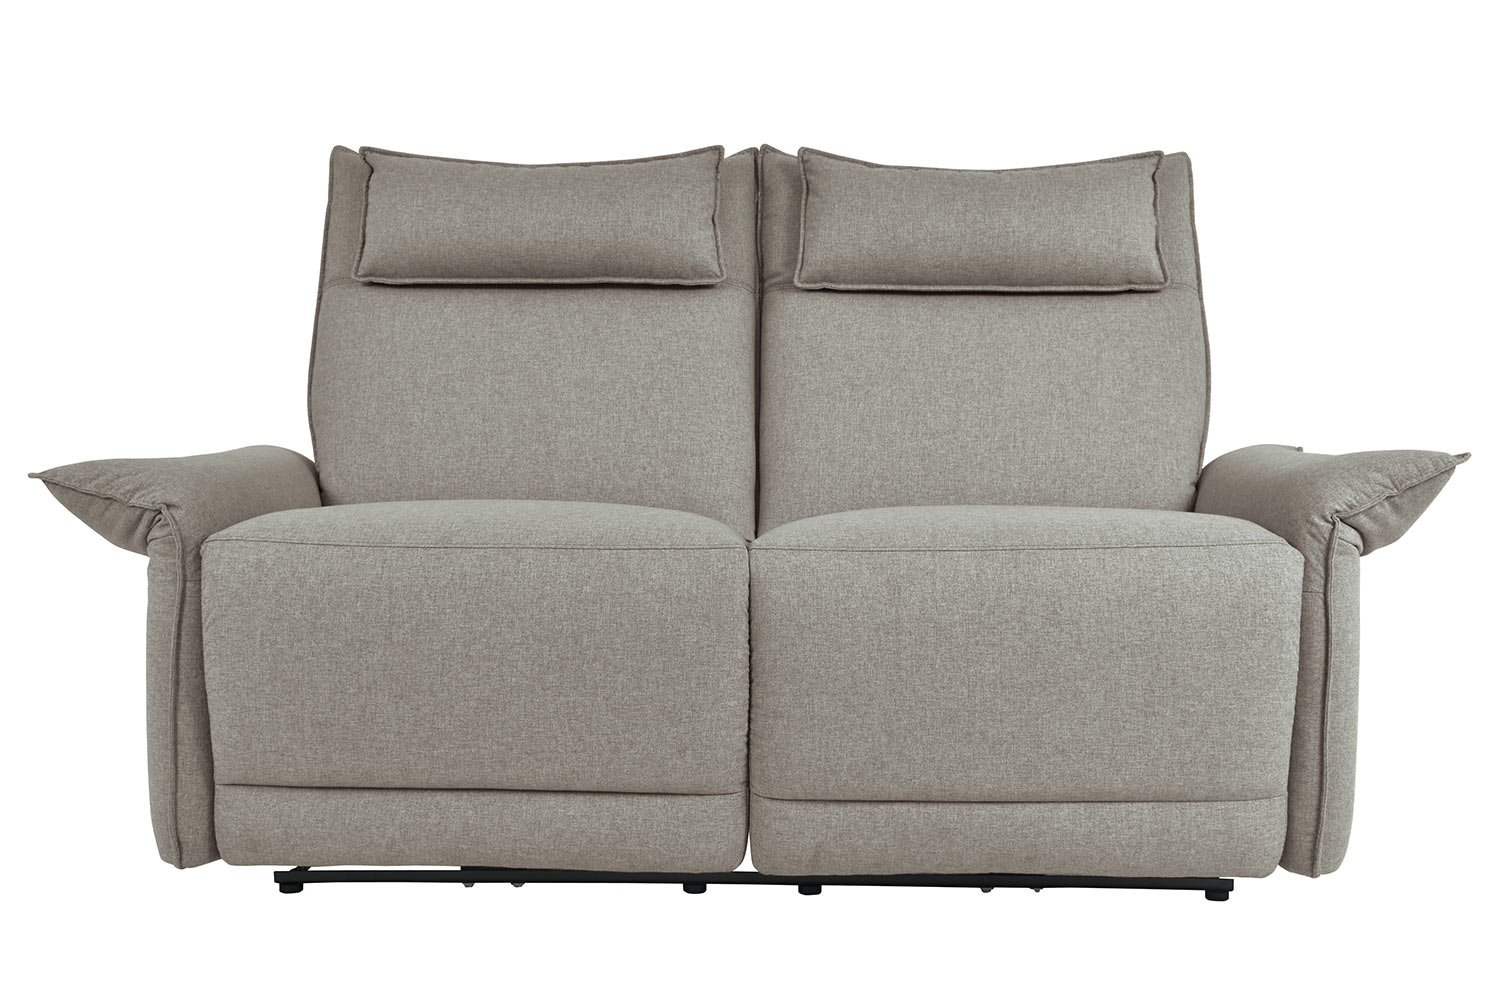 Homelegance Linette Power Double Reclining Love Seat with Power Headrests - Taupe